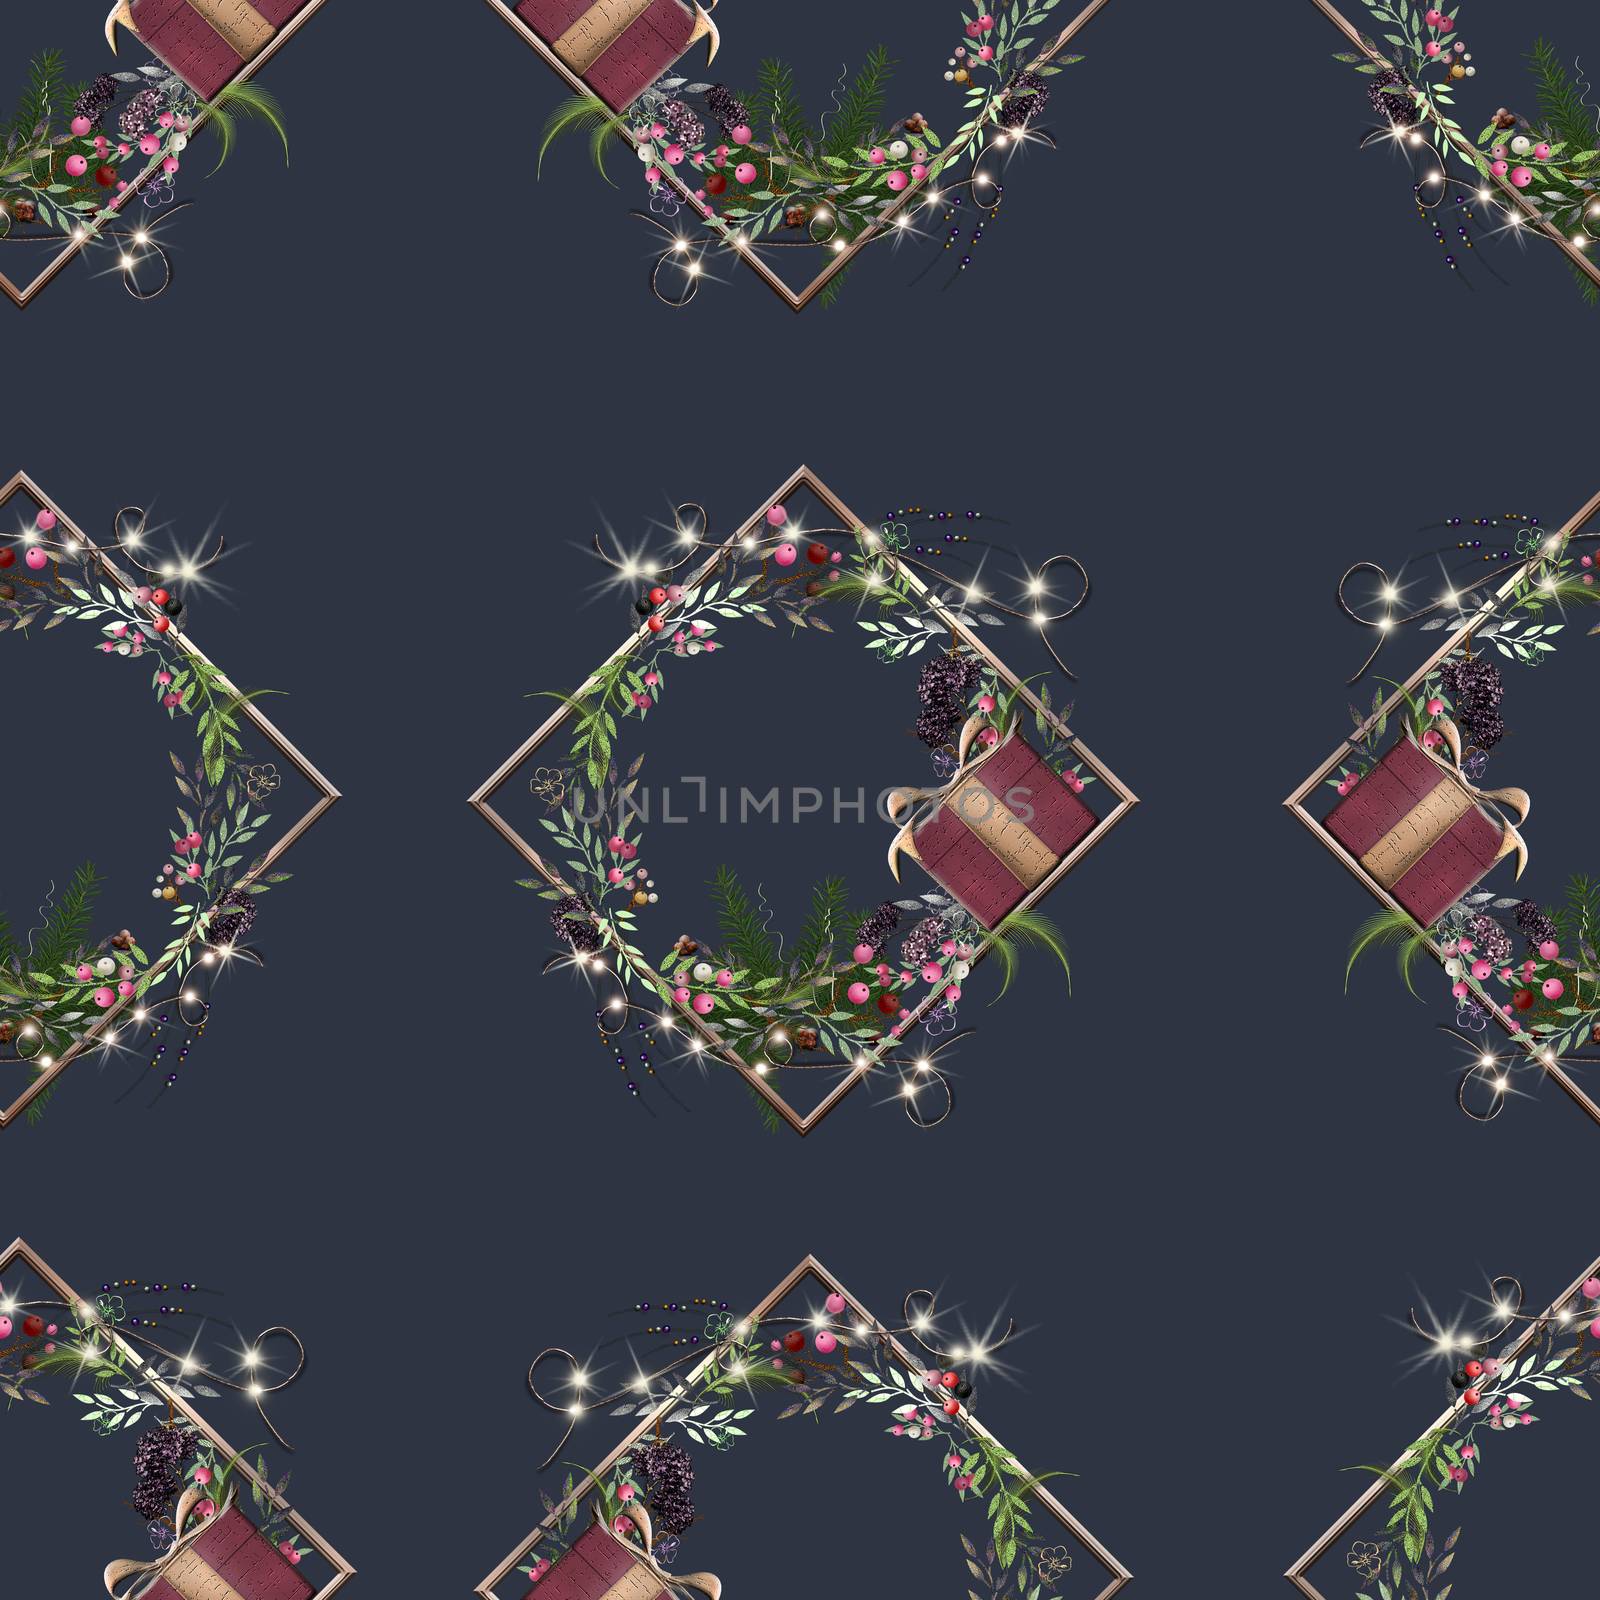 Christmas seamless pattern. Christmas floral wreath with gift box and lights on blue background. Unique design in 3D illustration in modern trendy style for festive holiday season design